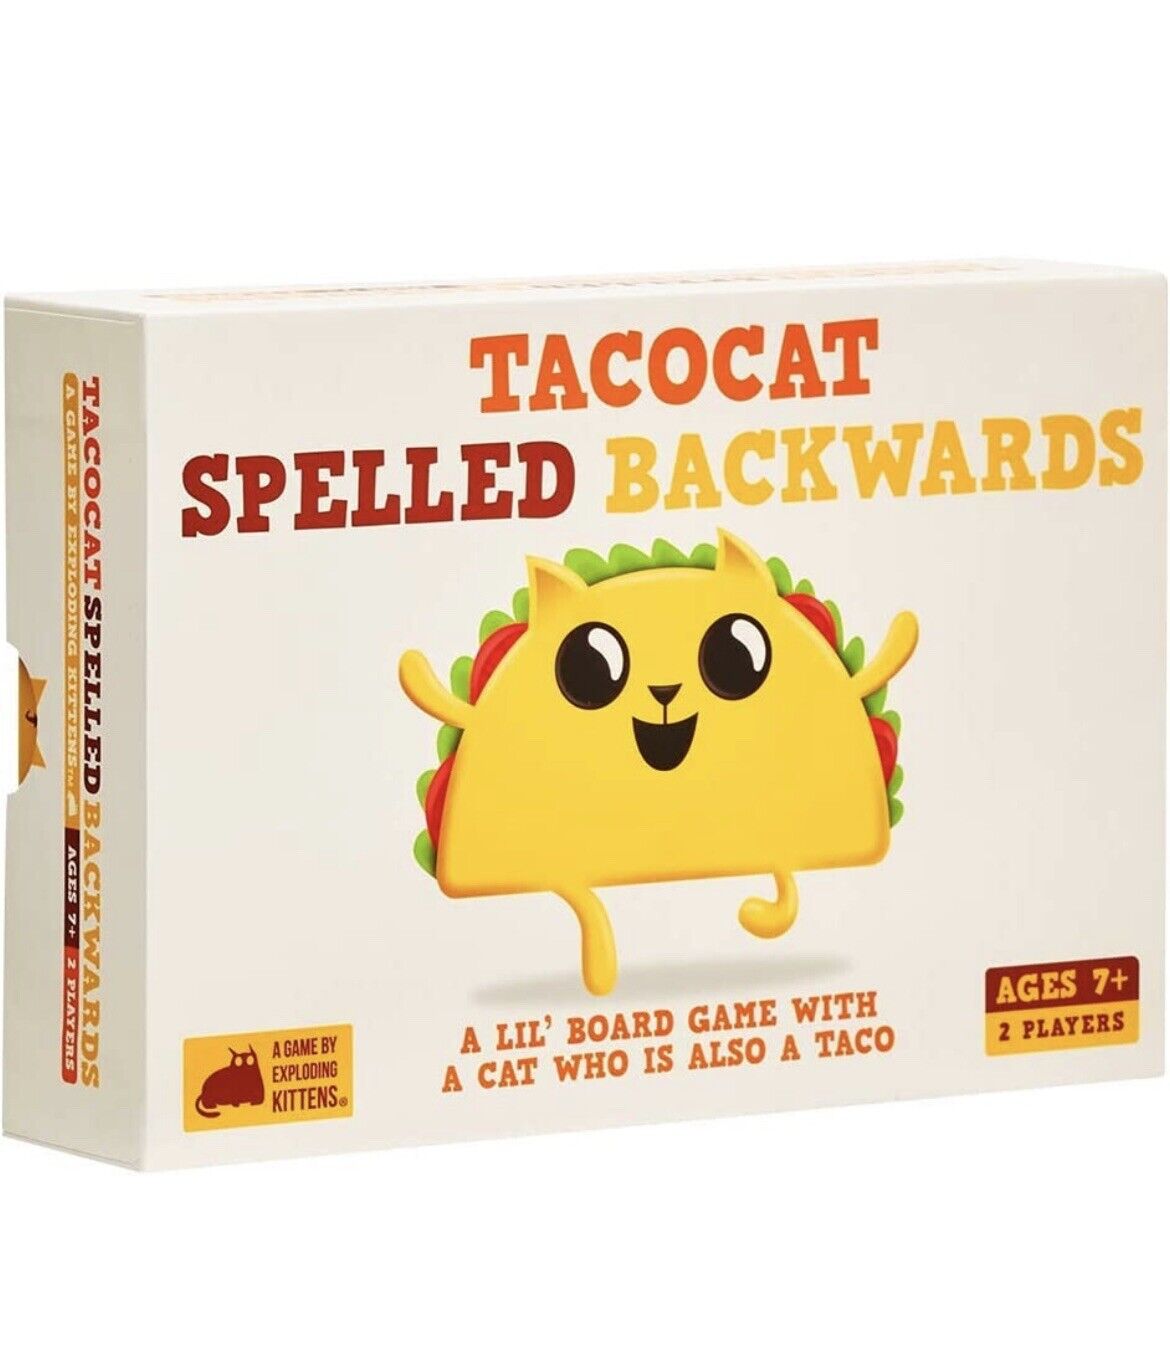 TACOCAT SPELLED BACKWARDS FAMILY CARD GAME 2 Players Ages 7+ New Factory Sealed